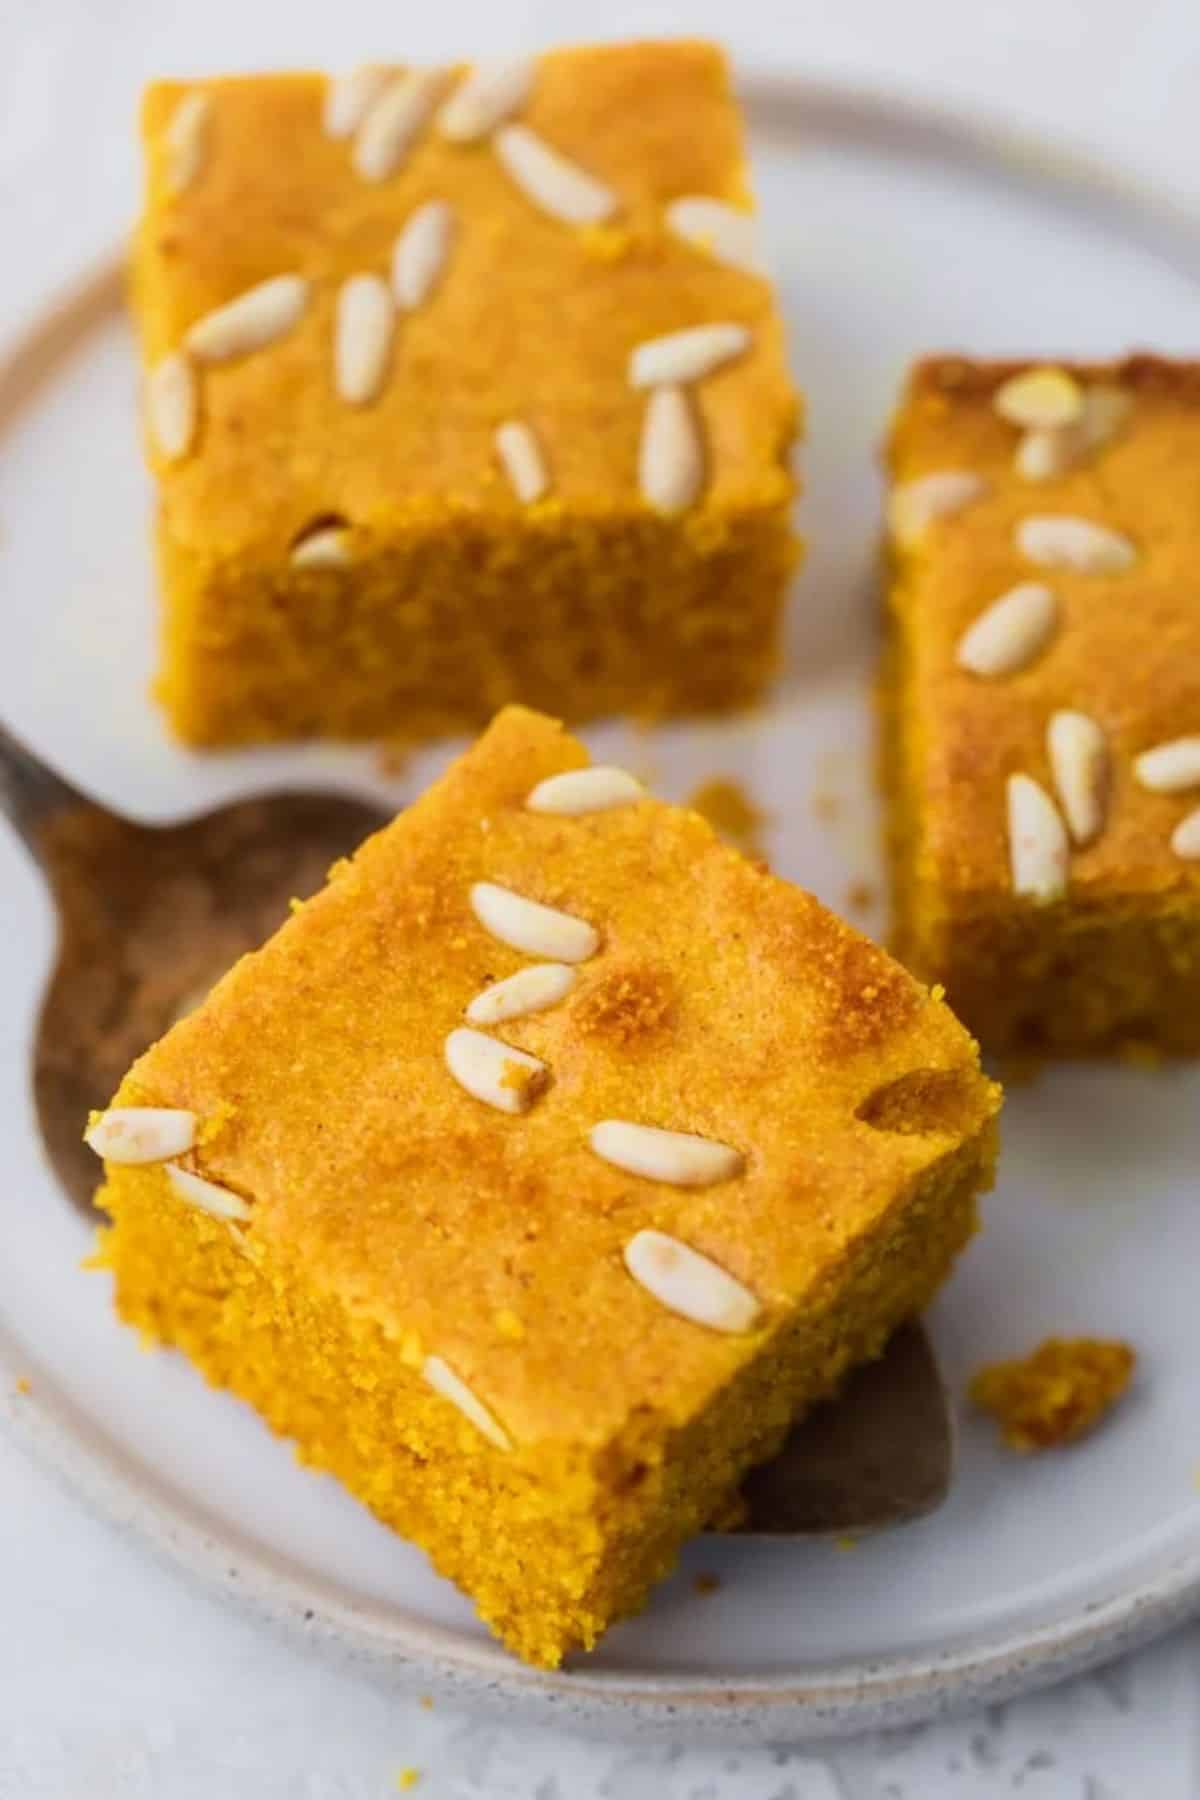 Three pieces of Turmeric Cake on a tray.